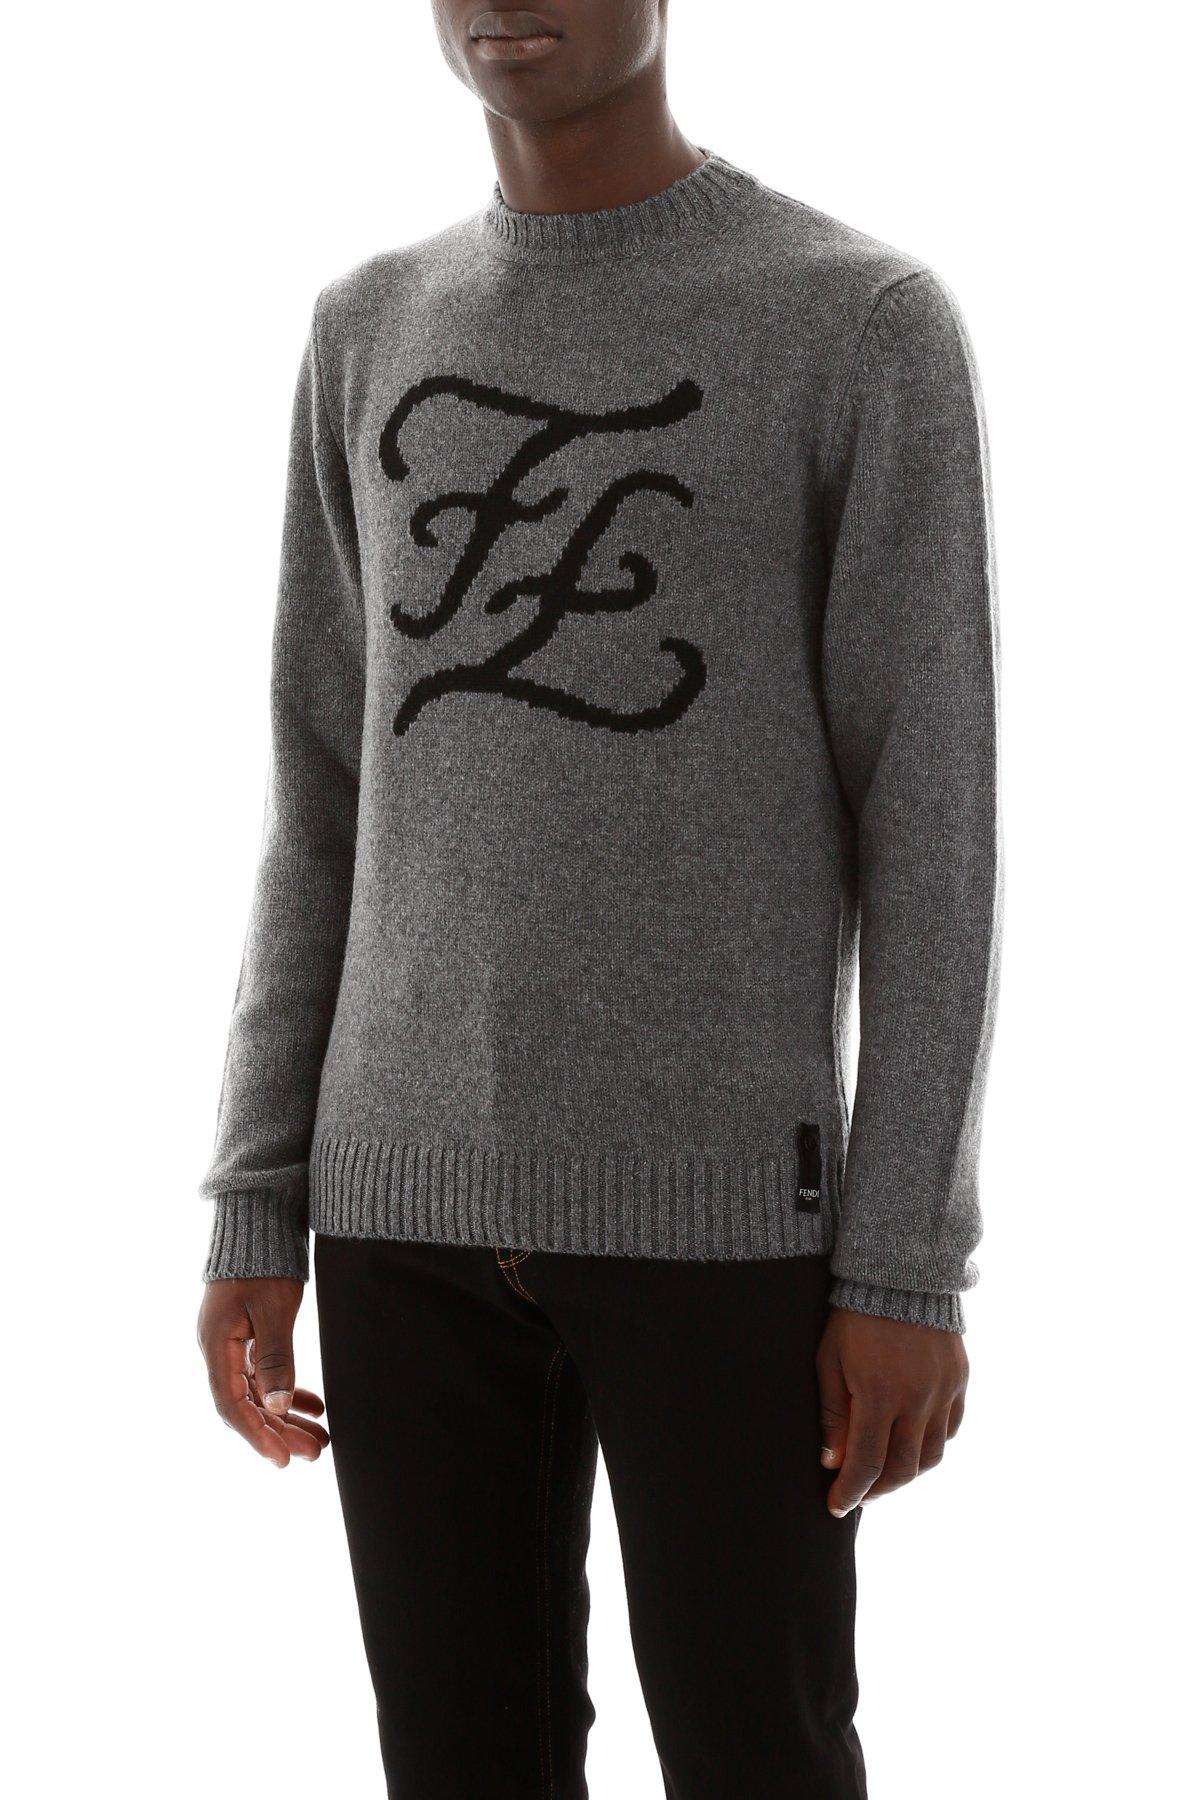 Fendi Cashmere Karligraphy Pullover in Grey (Gray) for Men - Save 29% ...